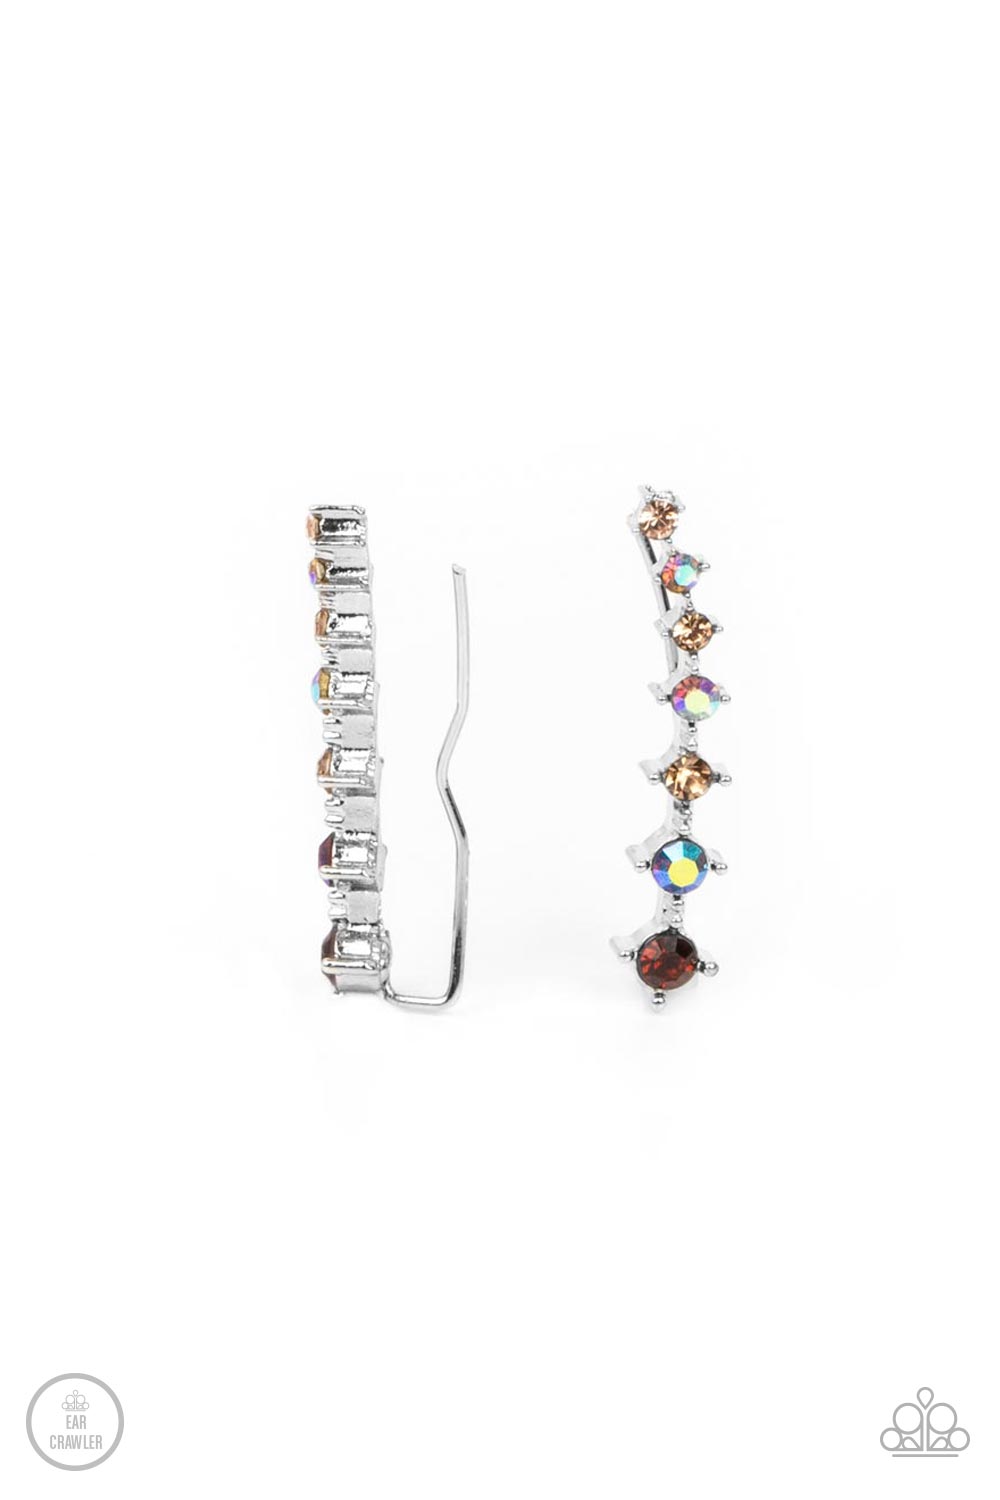 An iridescent spectrum of dainty topaz rhinestones gradually increase in intensity as they climb the ear for a stellar fashion. Features an extended post fitting that climbs the back of the ear and can be pressed together for a more secure fit.